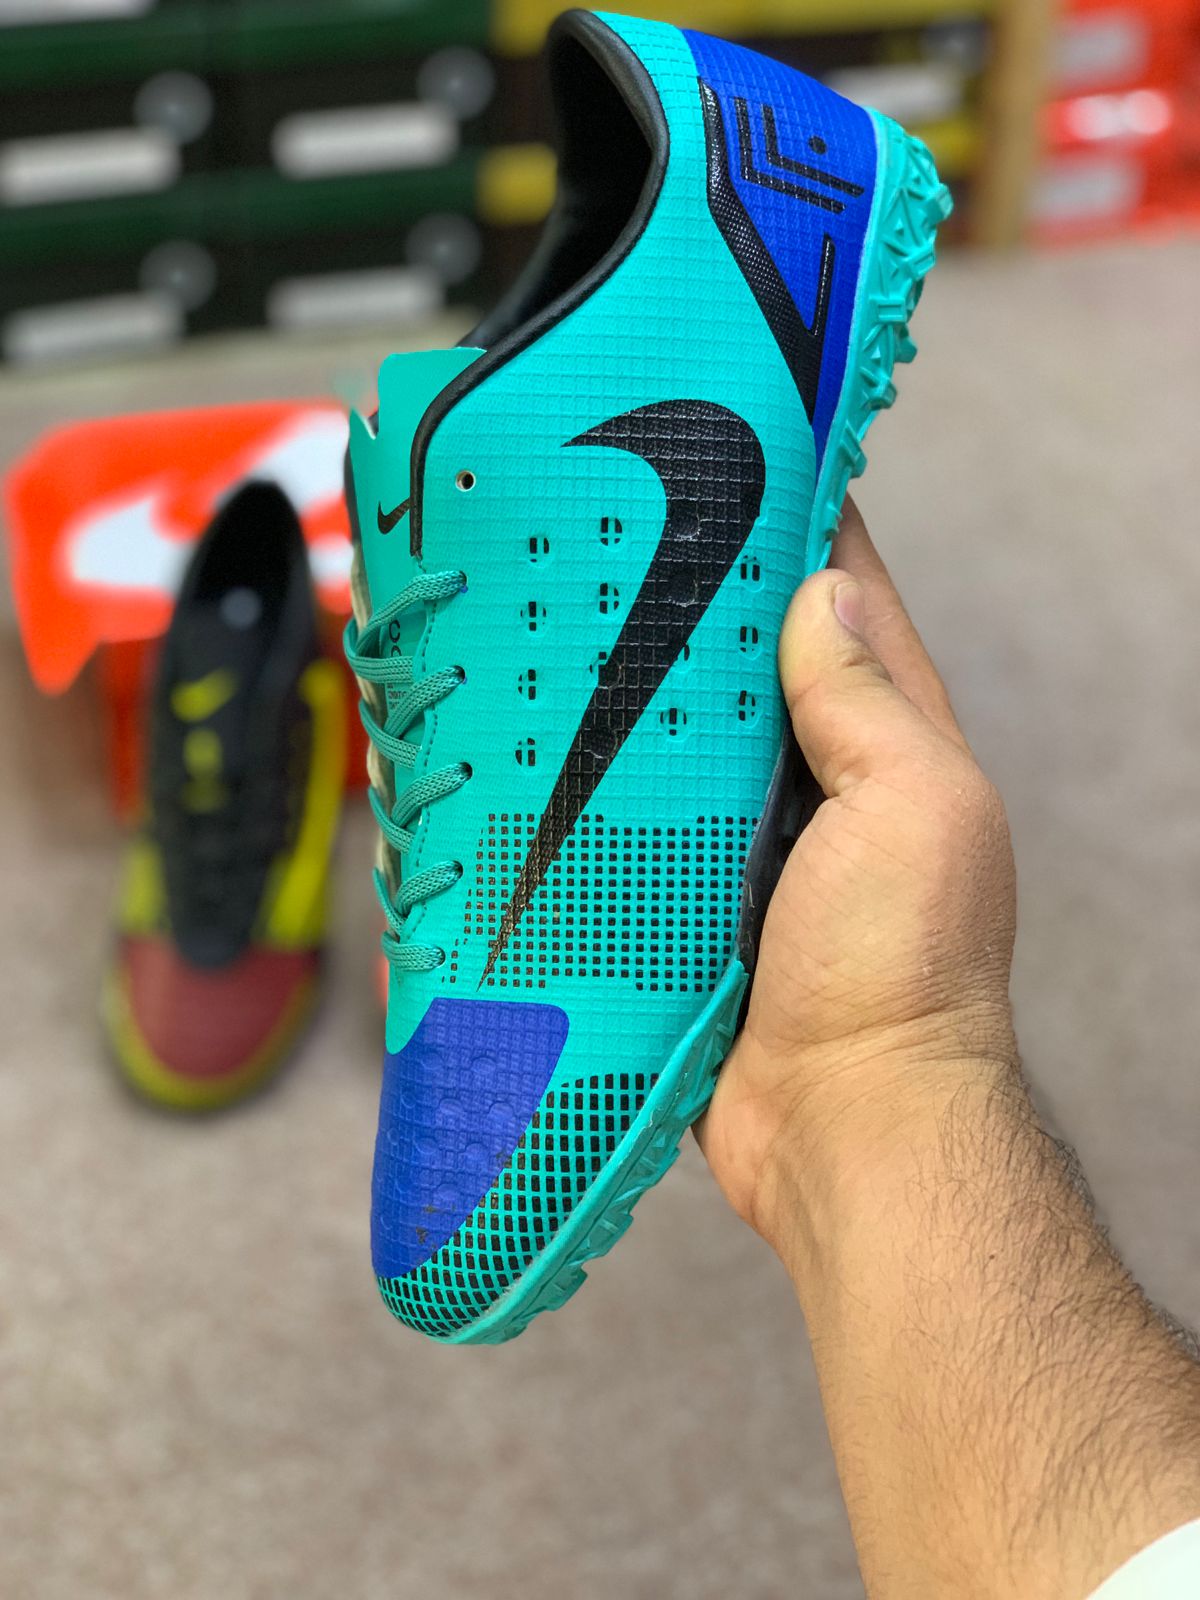 NKE - Football Boots - Green with Blue